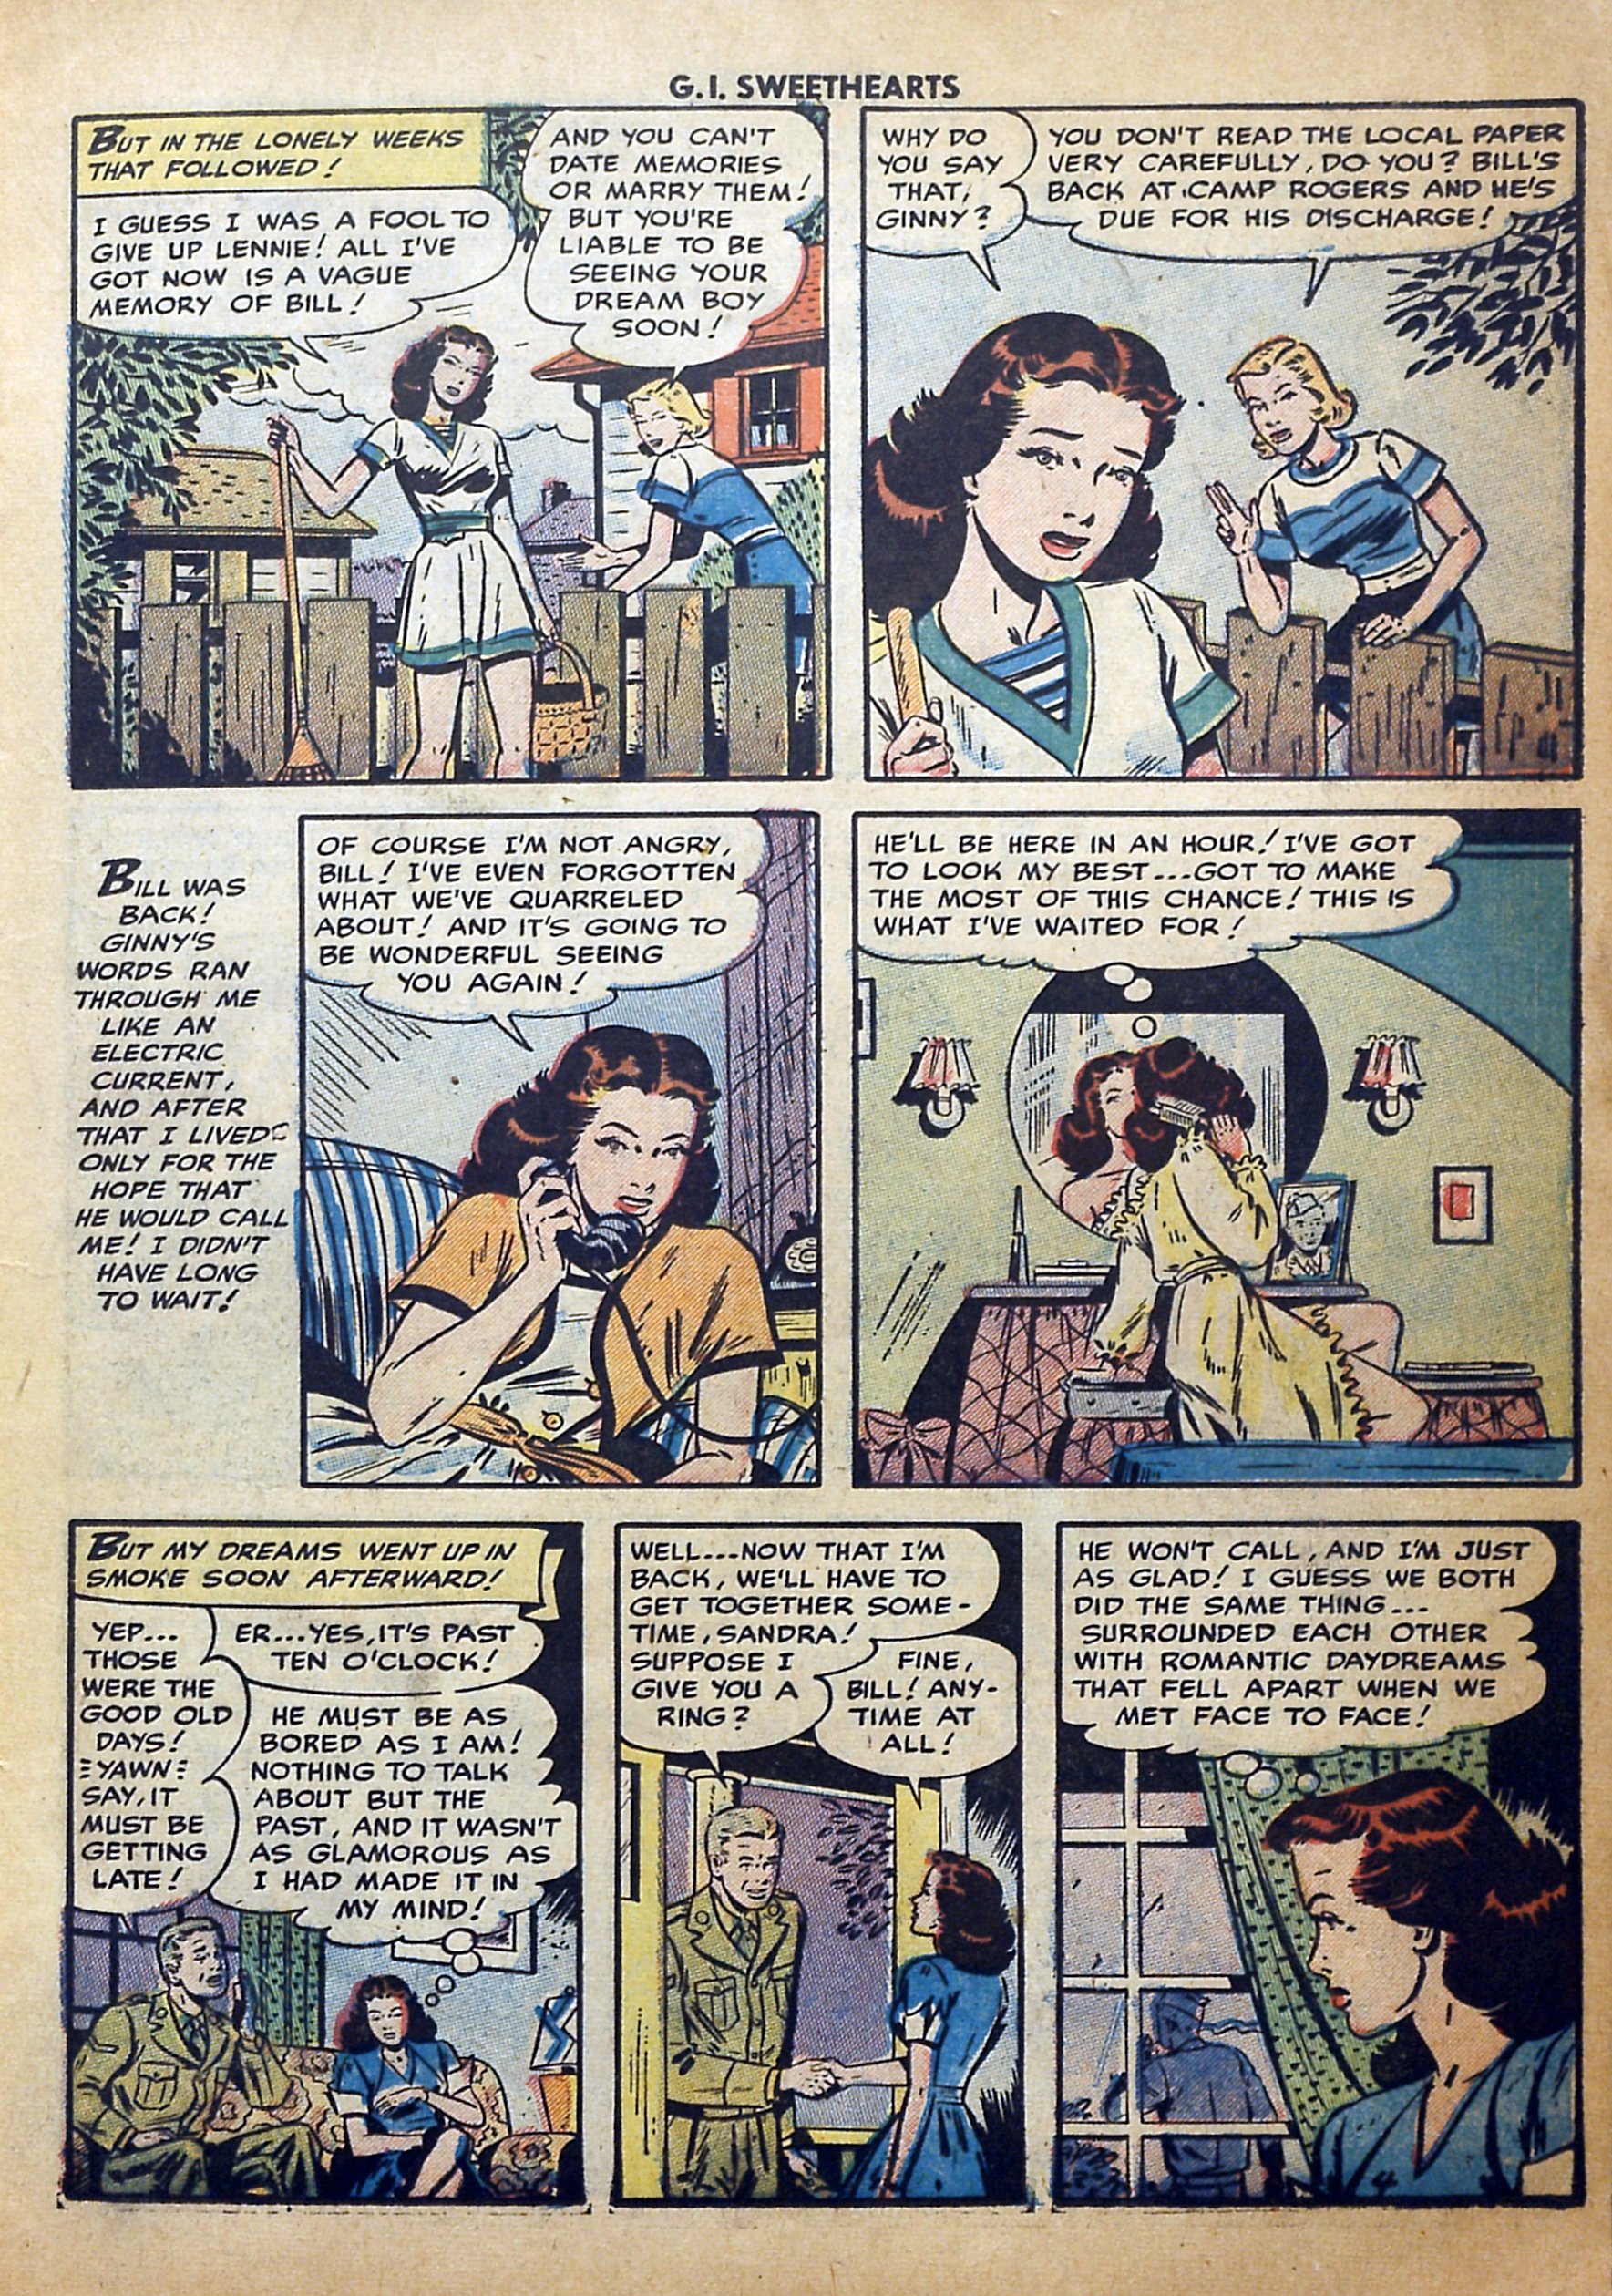 Read online G.I. Sweethearts comic -  Issue #43 - 15